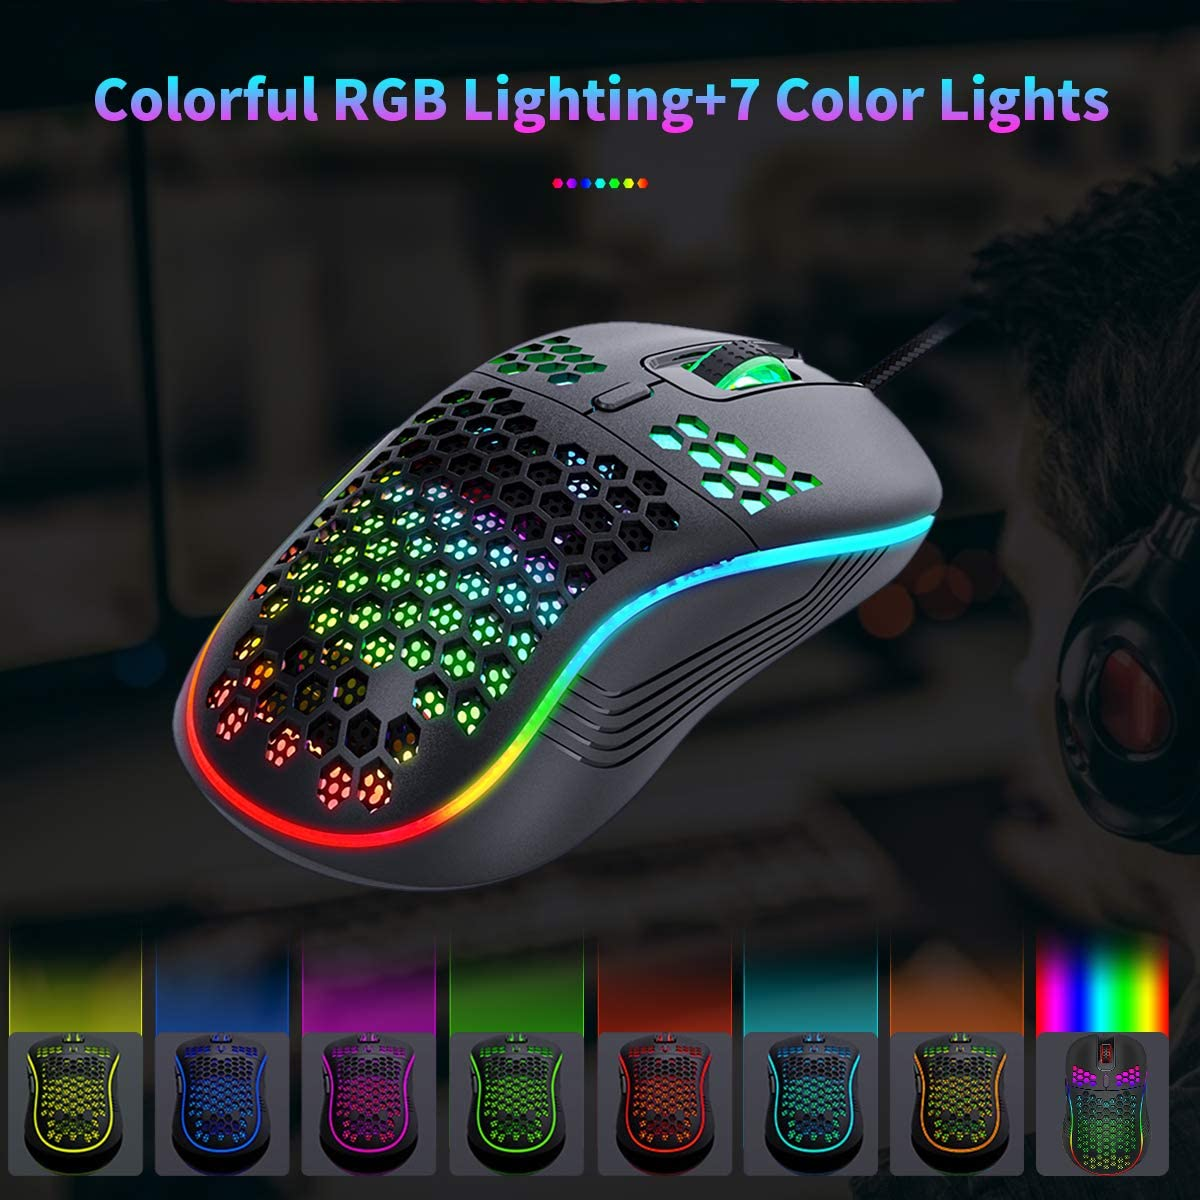 Lightweight Gaming Mouse, Wired USB PC Gaming Mice with Ultralight Honeycomb Shell, RGB Chroma LED Light, 7200 DPI Adjustable, Programmable 6 Buttons Mouse for Windows 7/8/10/XP